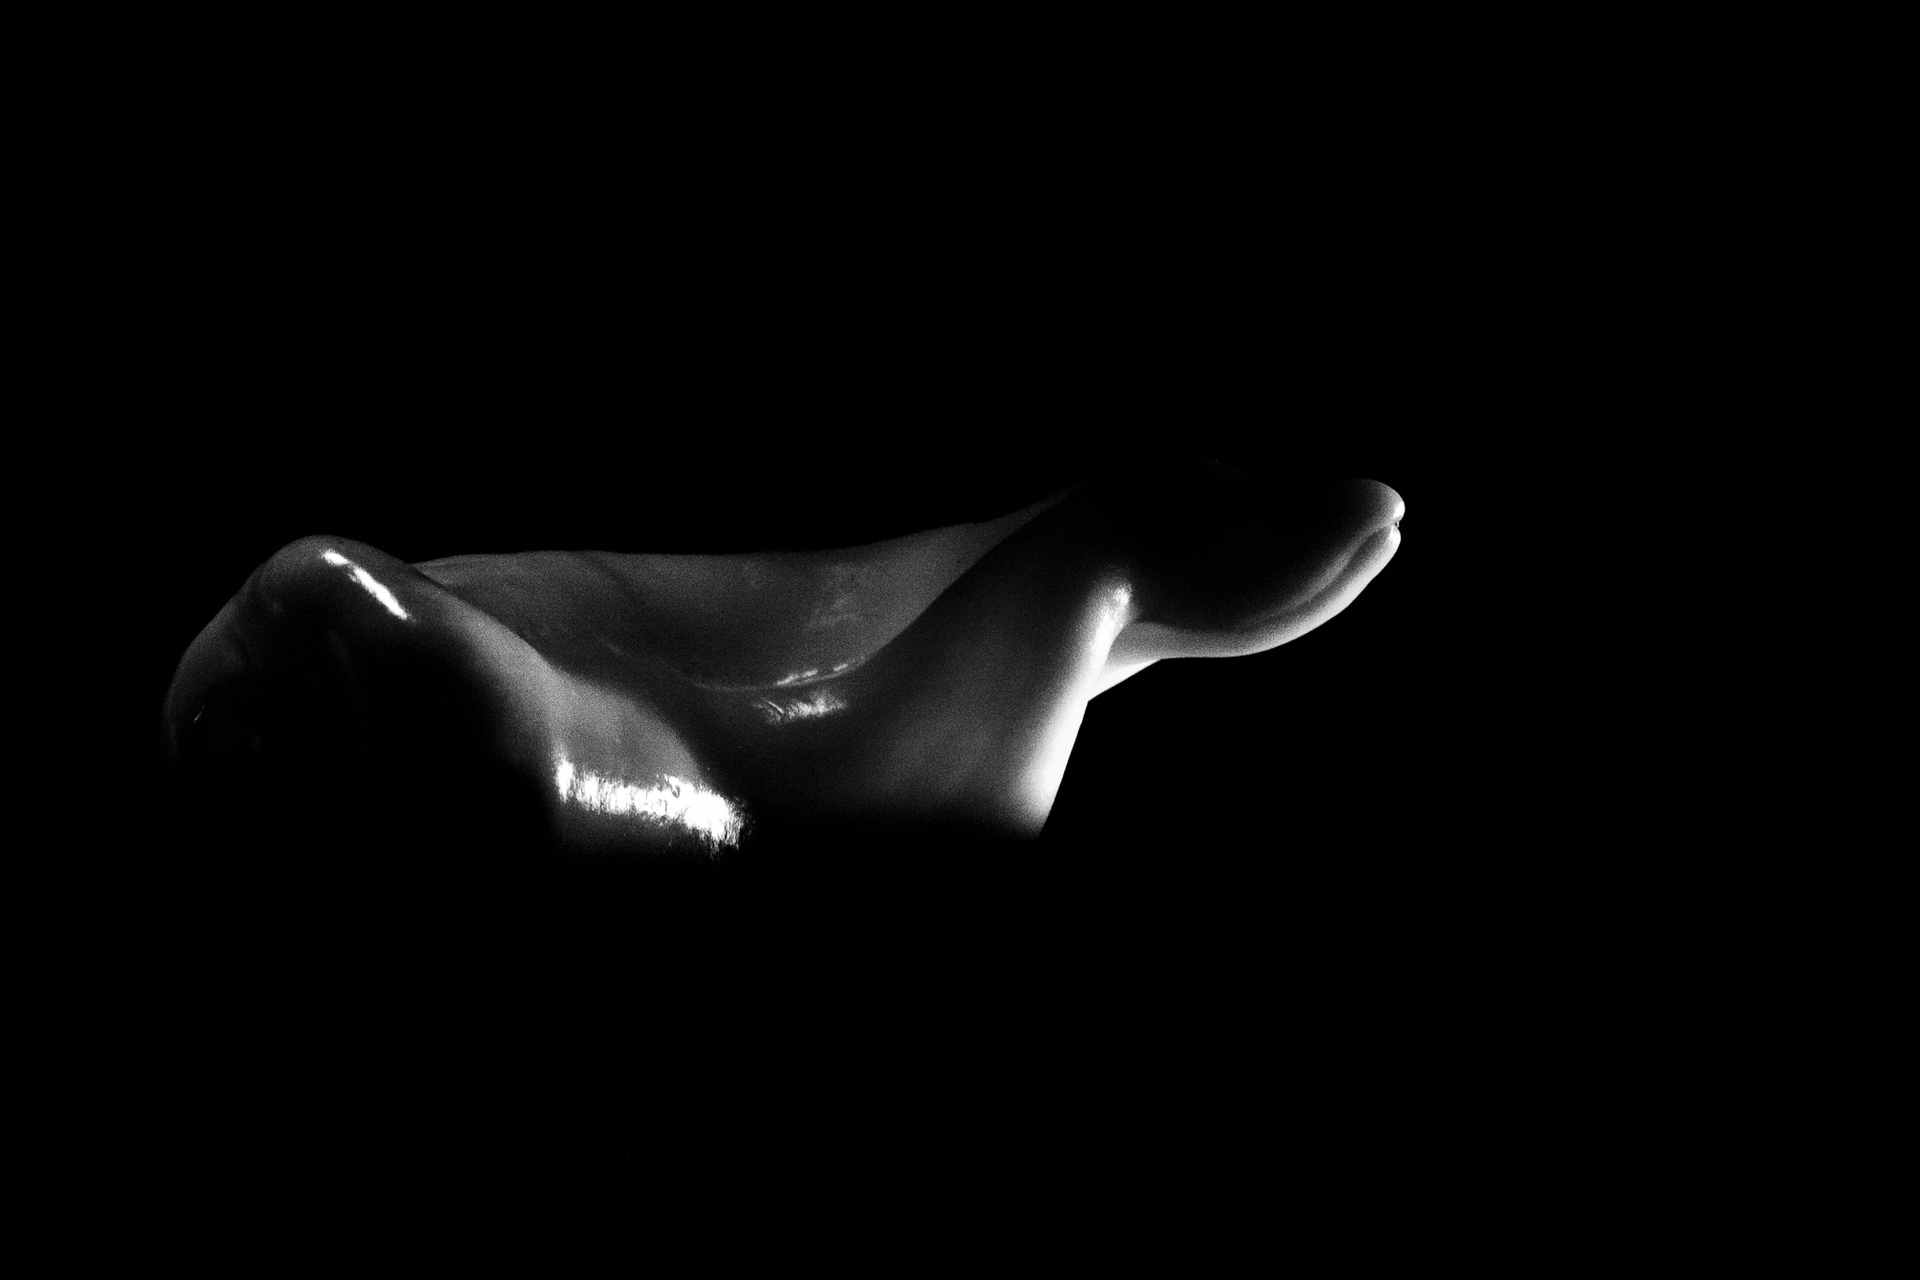 abstract bw dark image of pepper